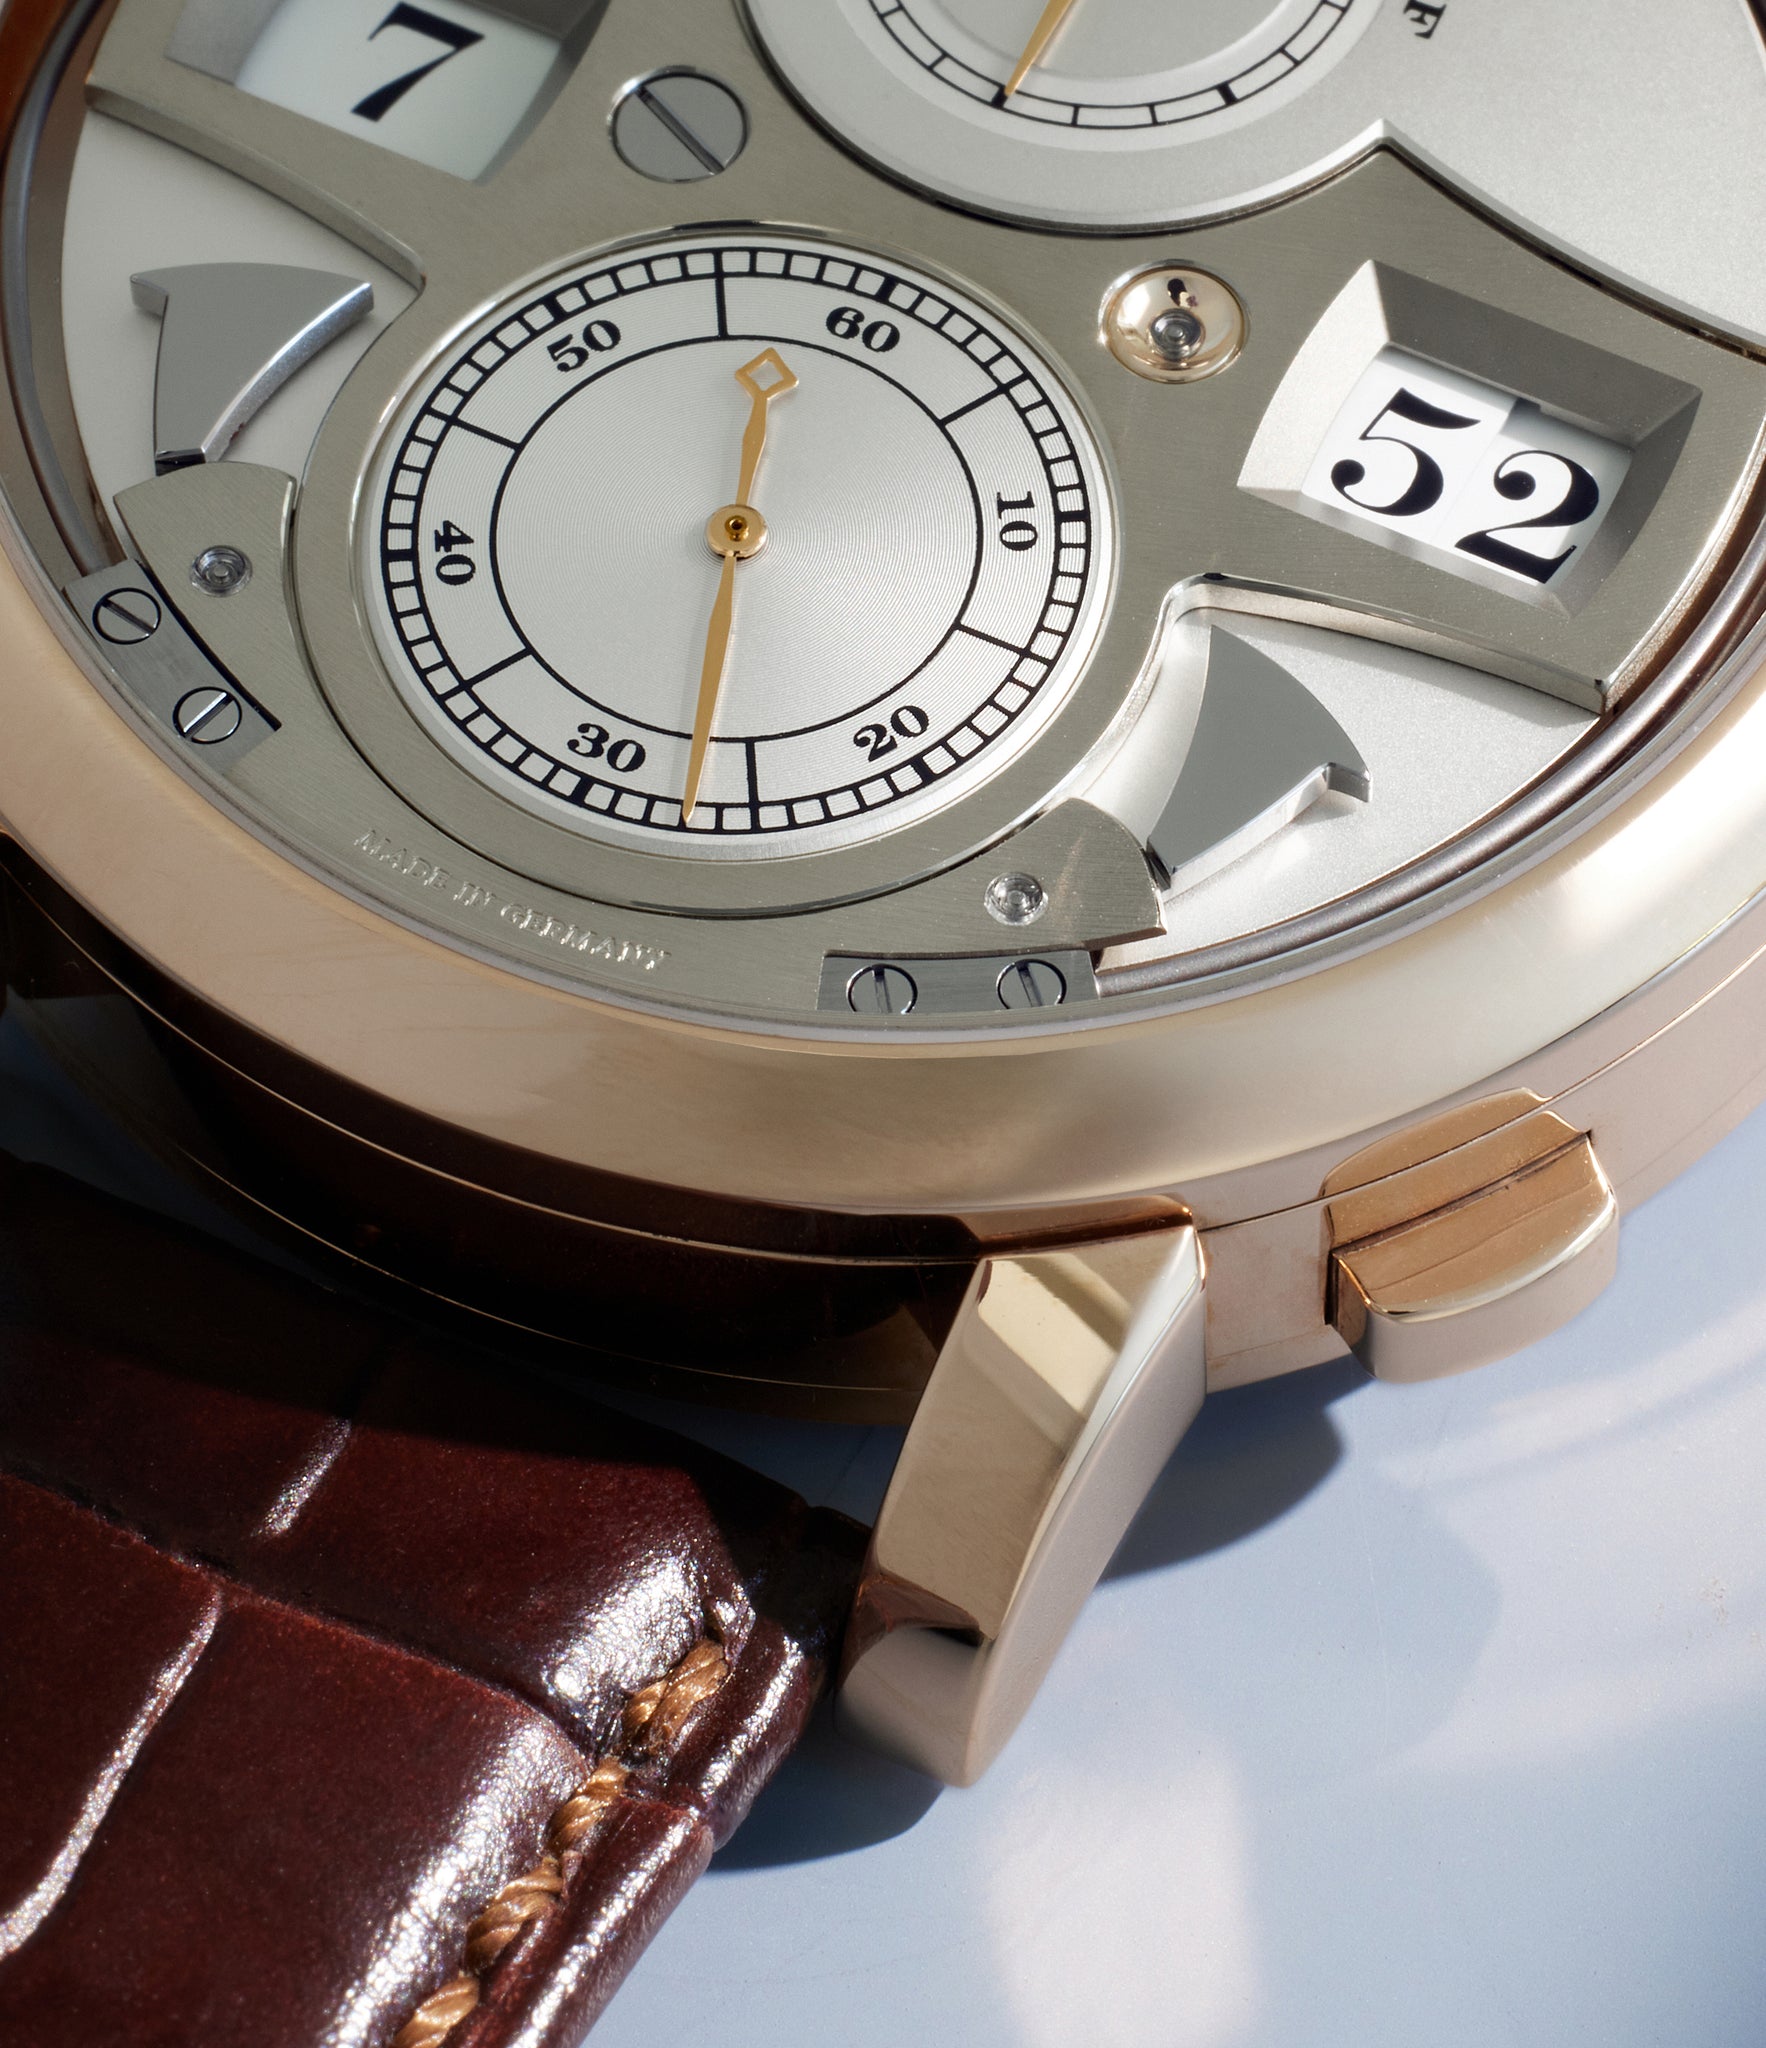 Read The History of A. Lange & Söhne Design with Anthony de Haas | A Collected Man Journal Post